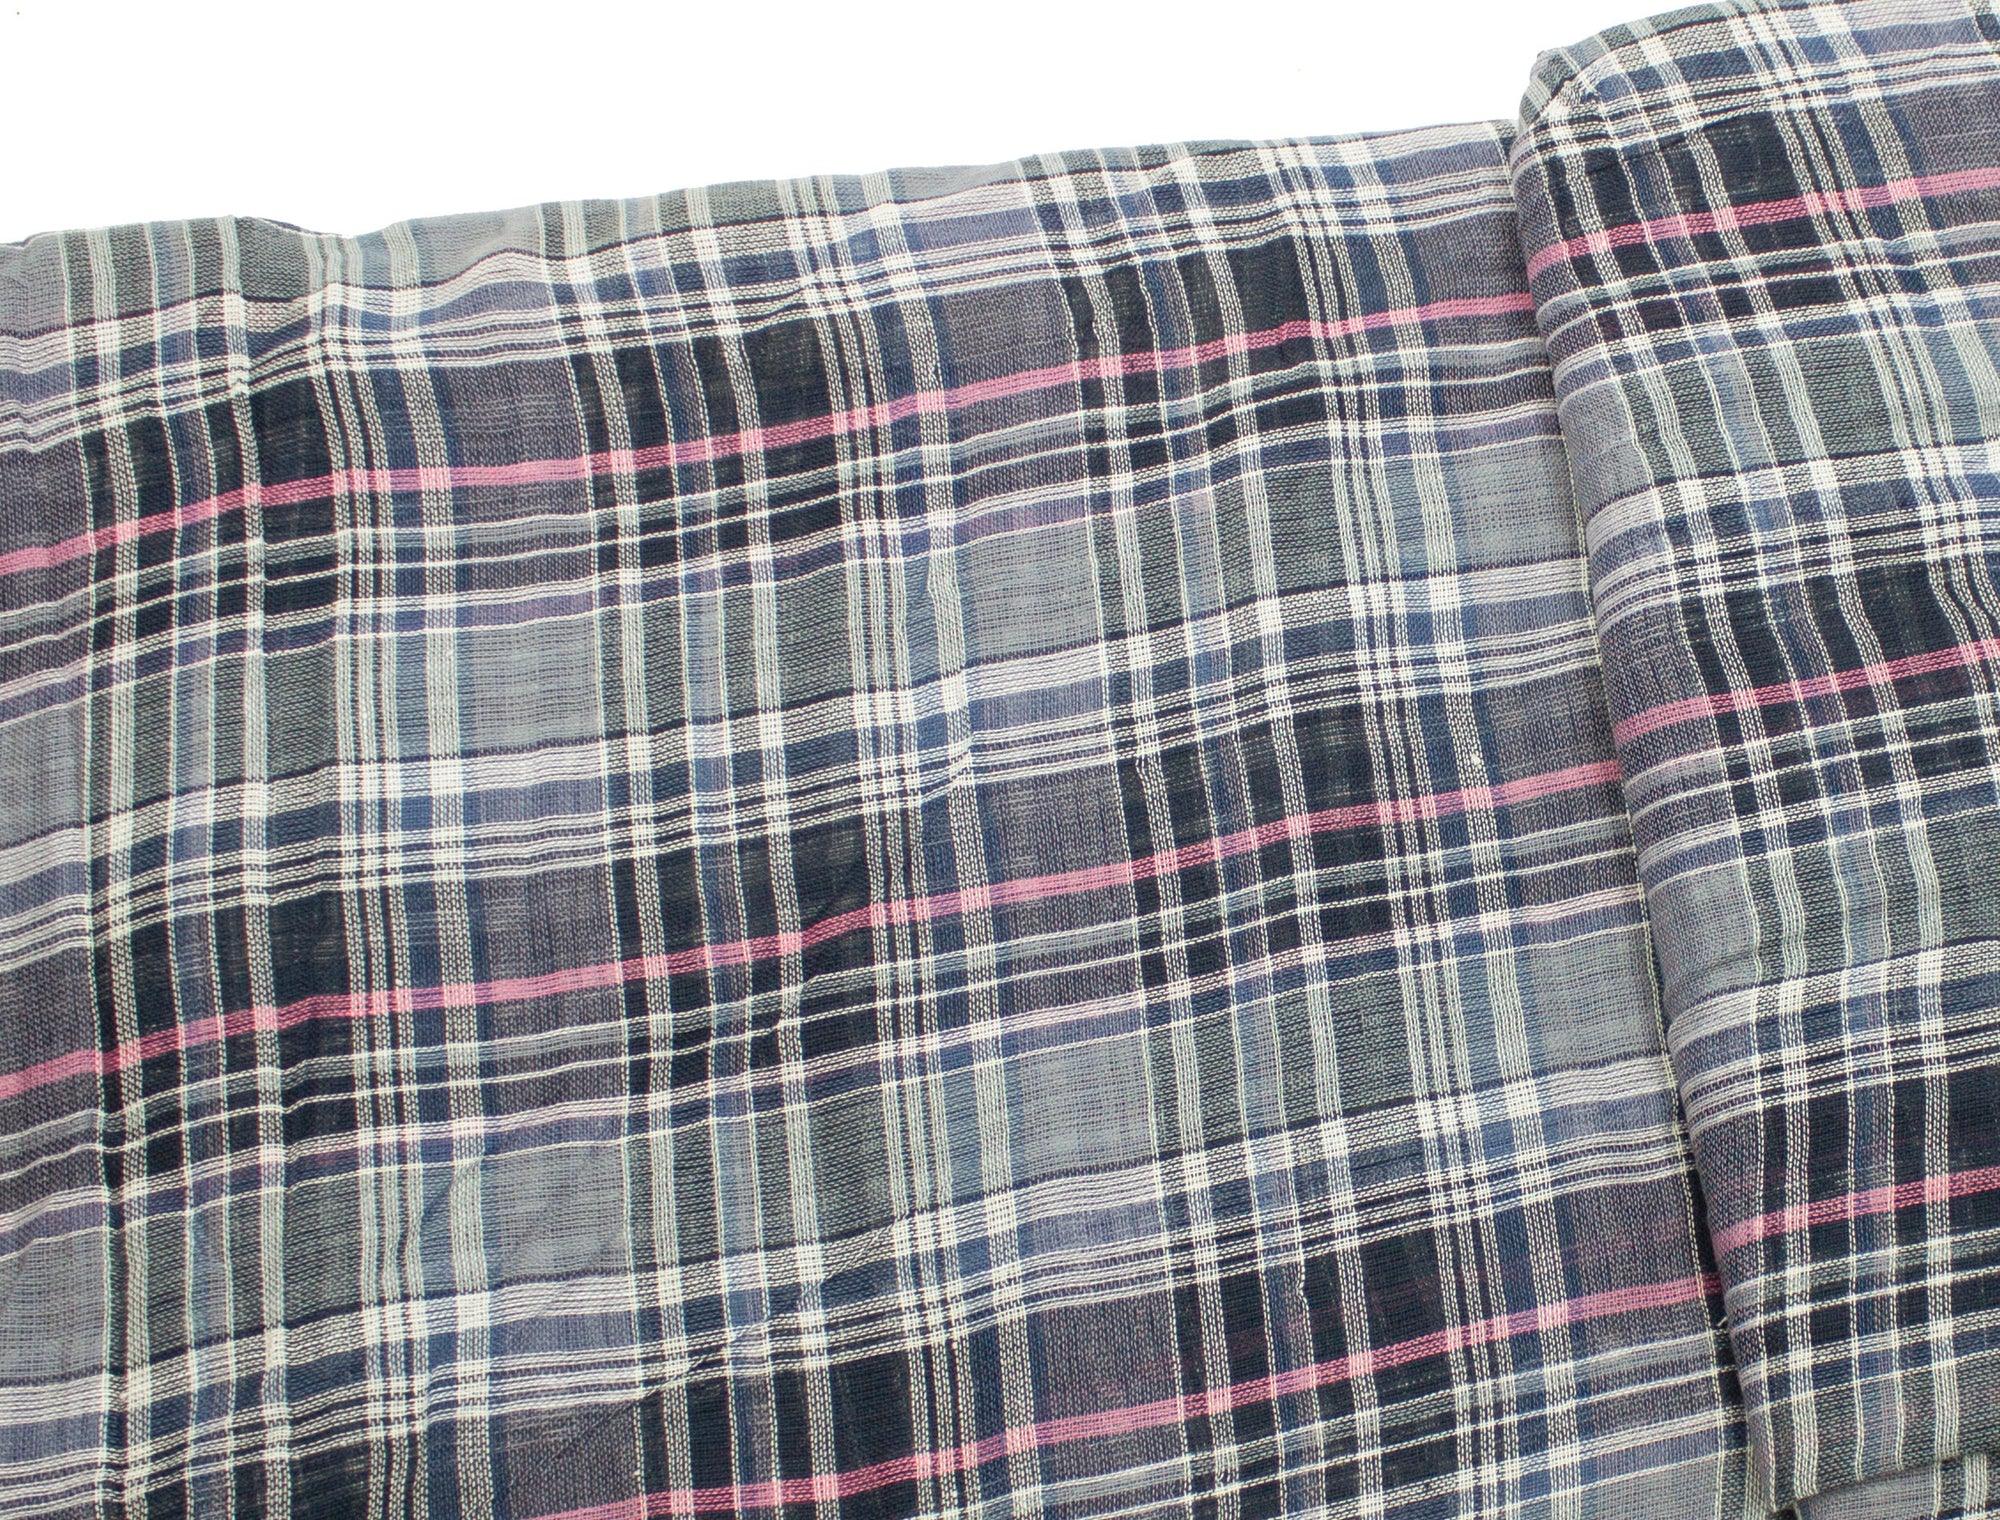 Vintage Fabric Navy, Grey Pink Plain Light Weight Cotton - Measures 45" Wide - Sold by the Yard